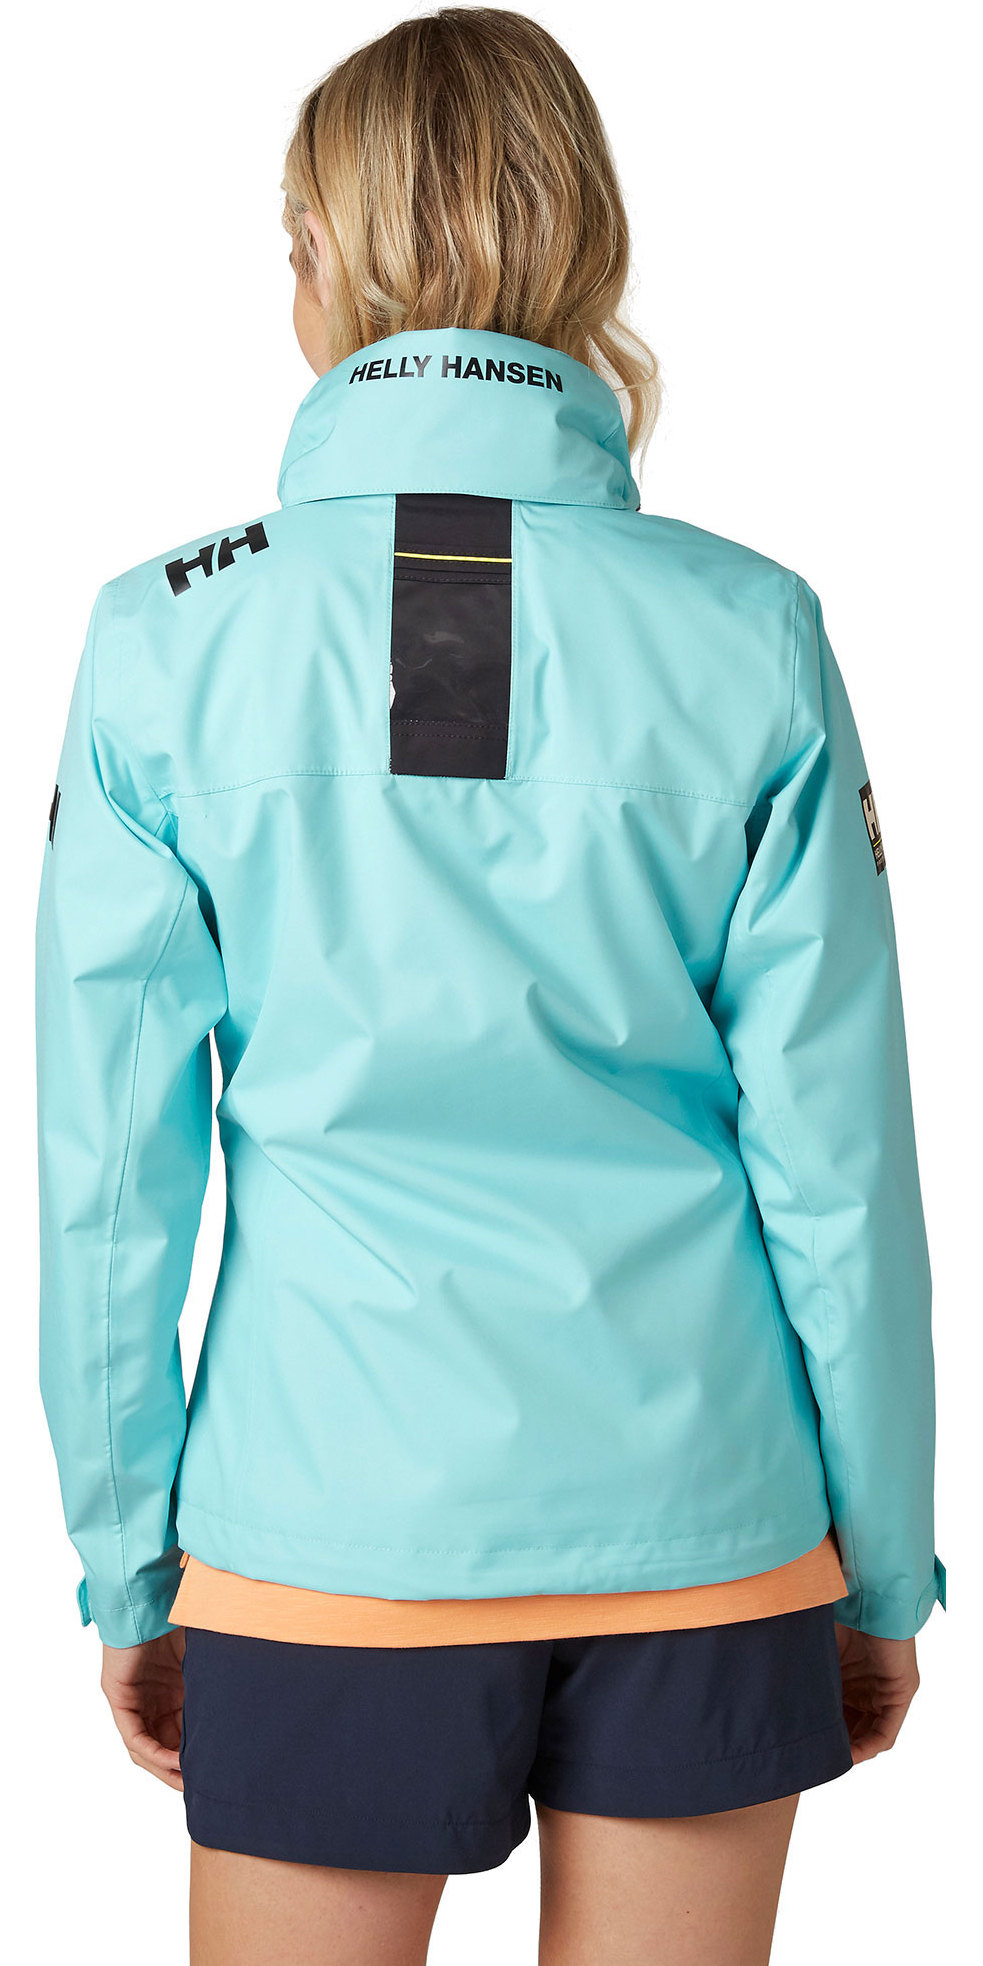 2020 Helly Hansen Womens Hooded Crew Mid Layer Jacket 33891 Glacier Blue Wetsuit Outlet